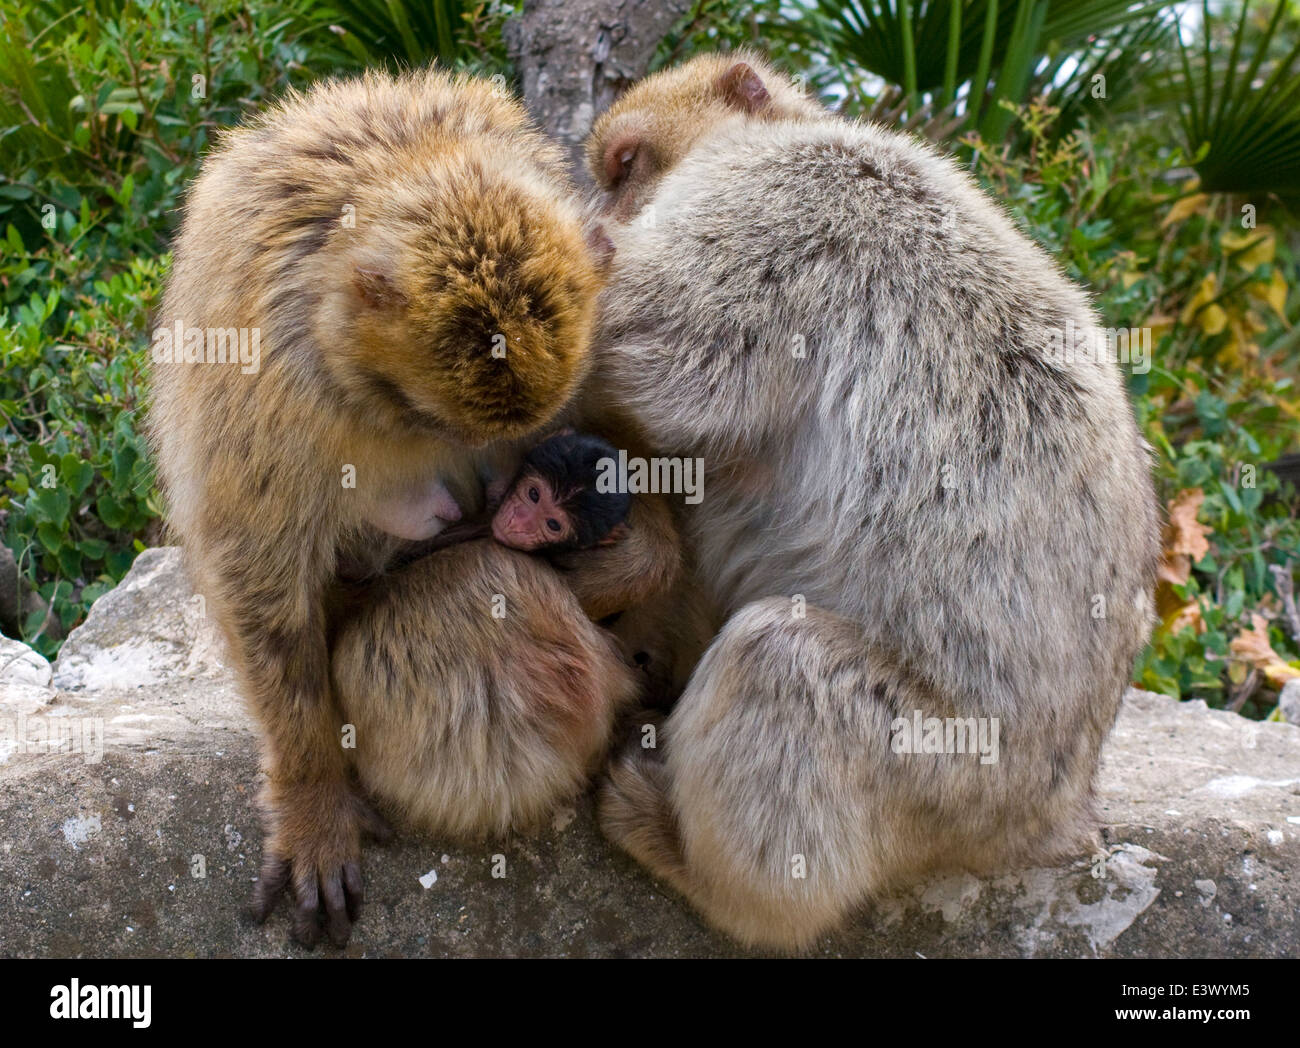 A Family of Barbary Macaques Stock Photo